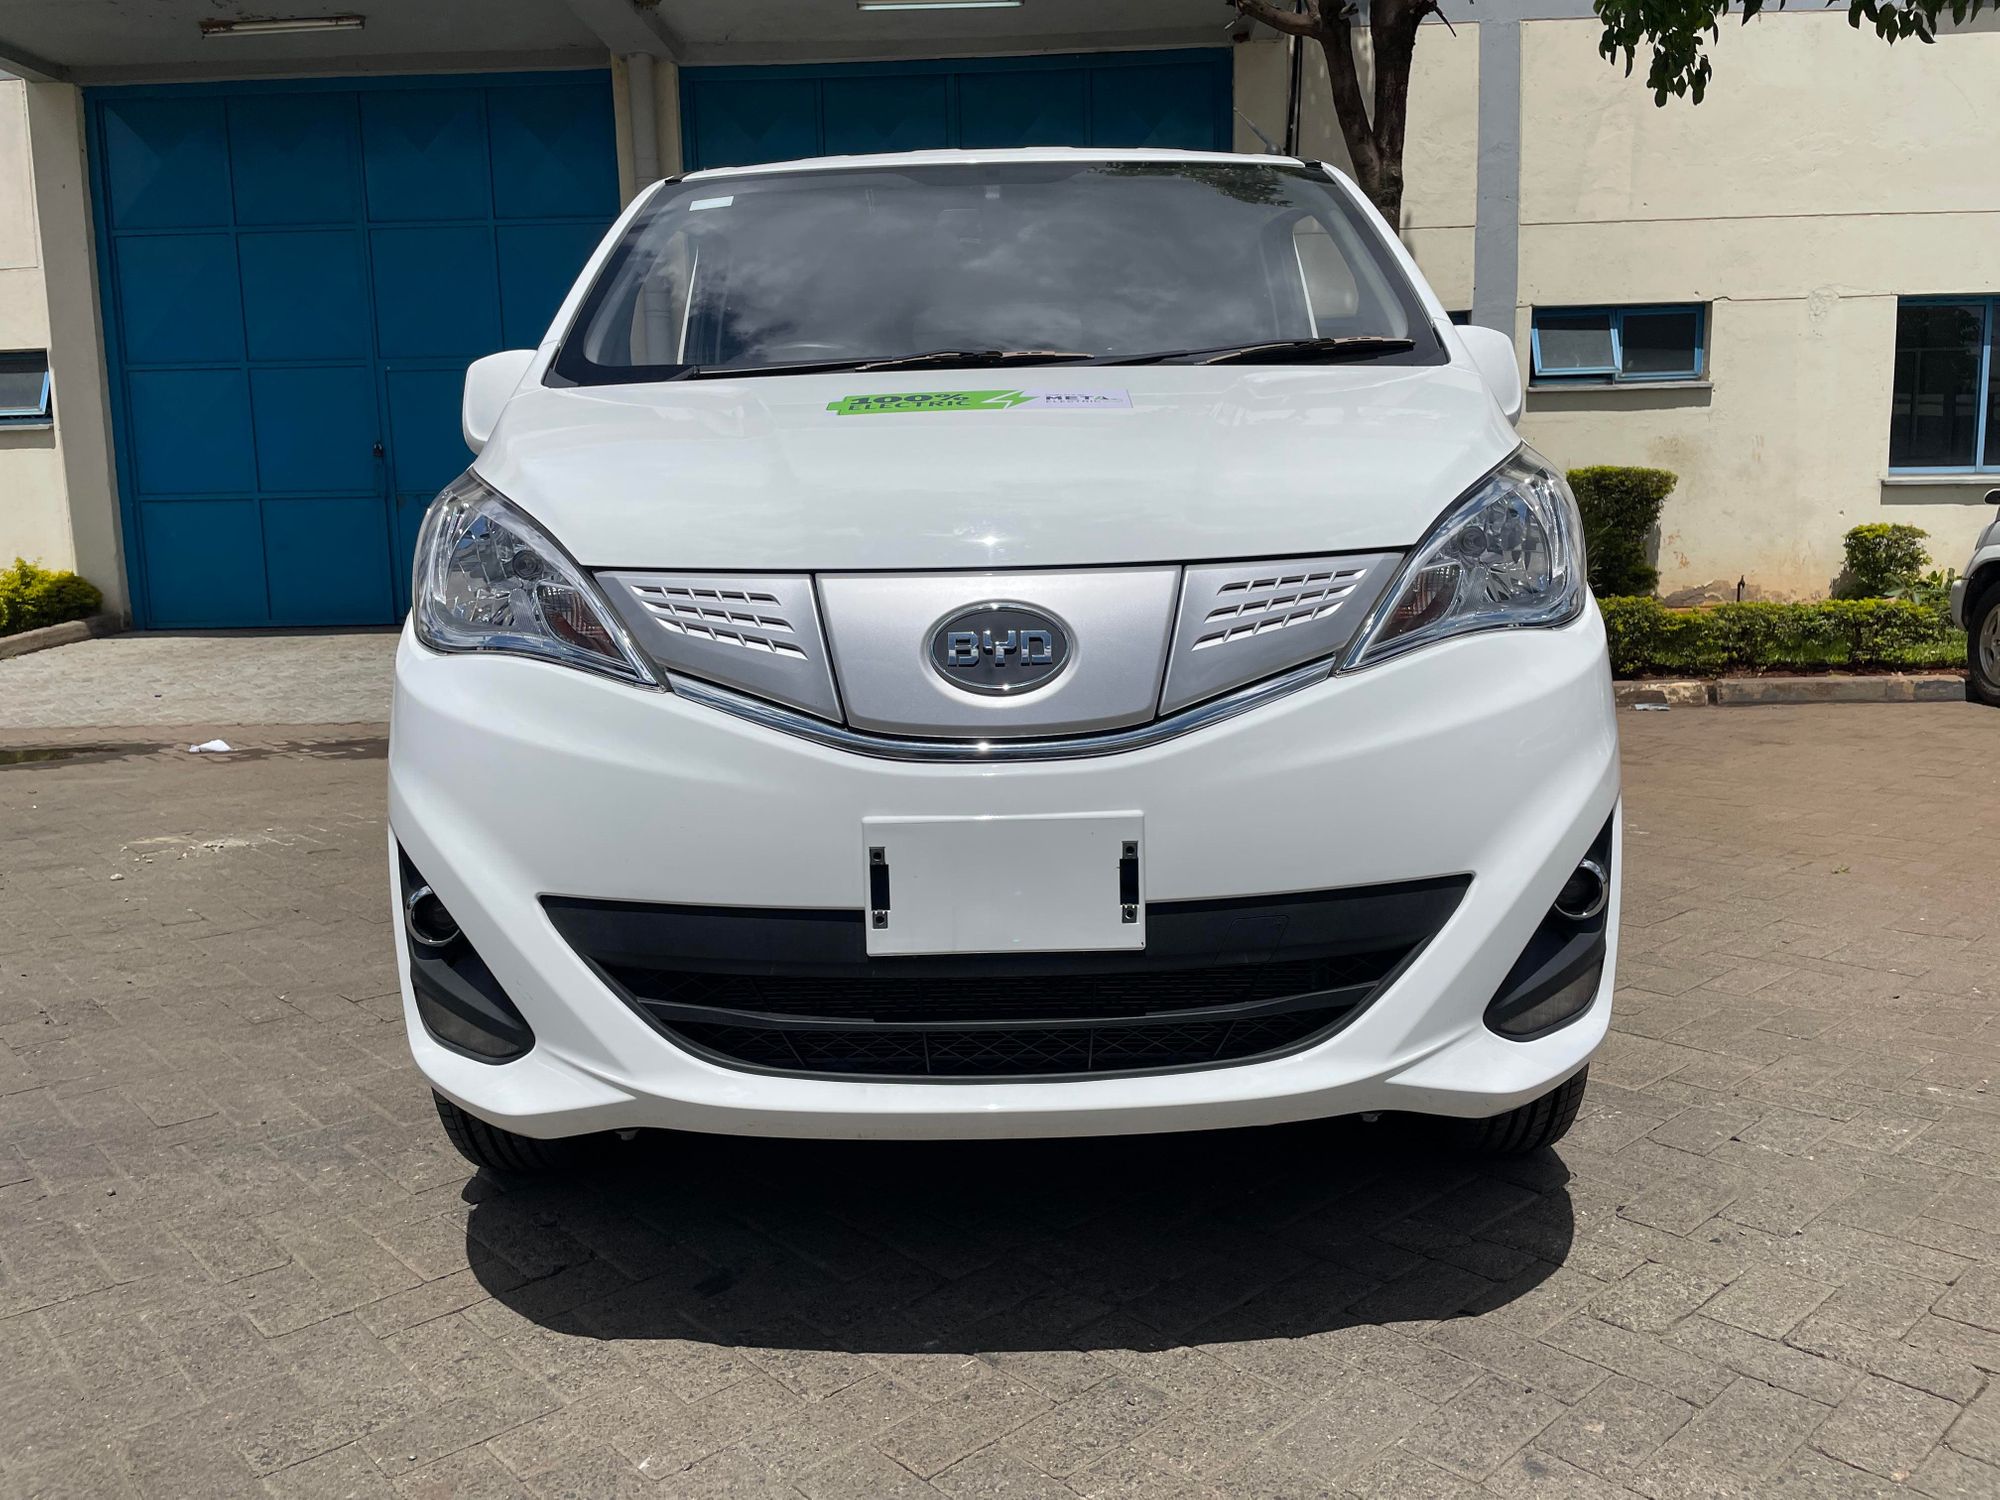 meta-electric-starts-to-lease-electric-vehicles-in-kenya